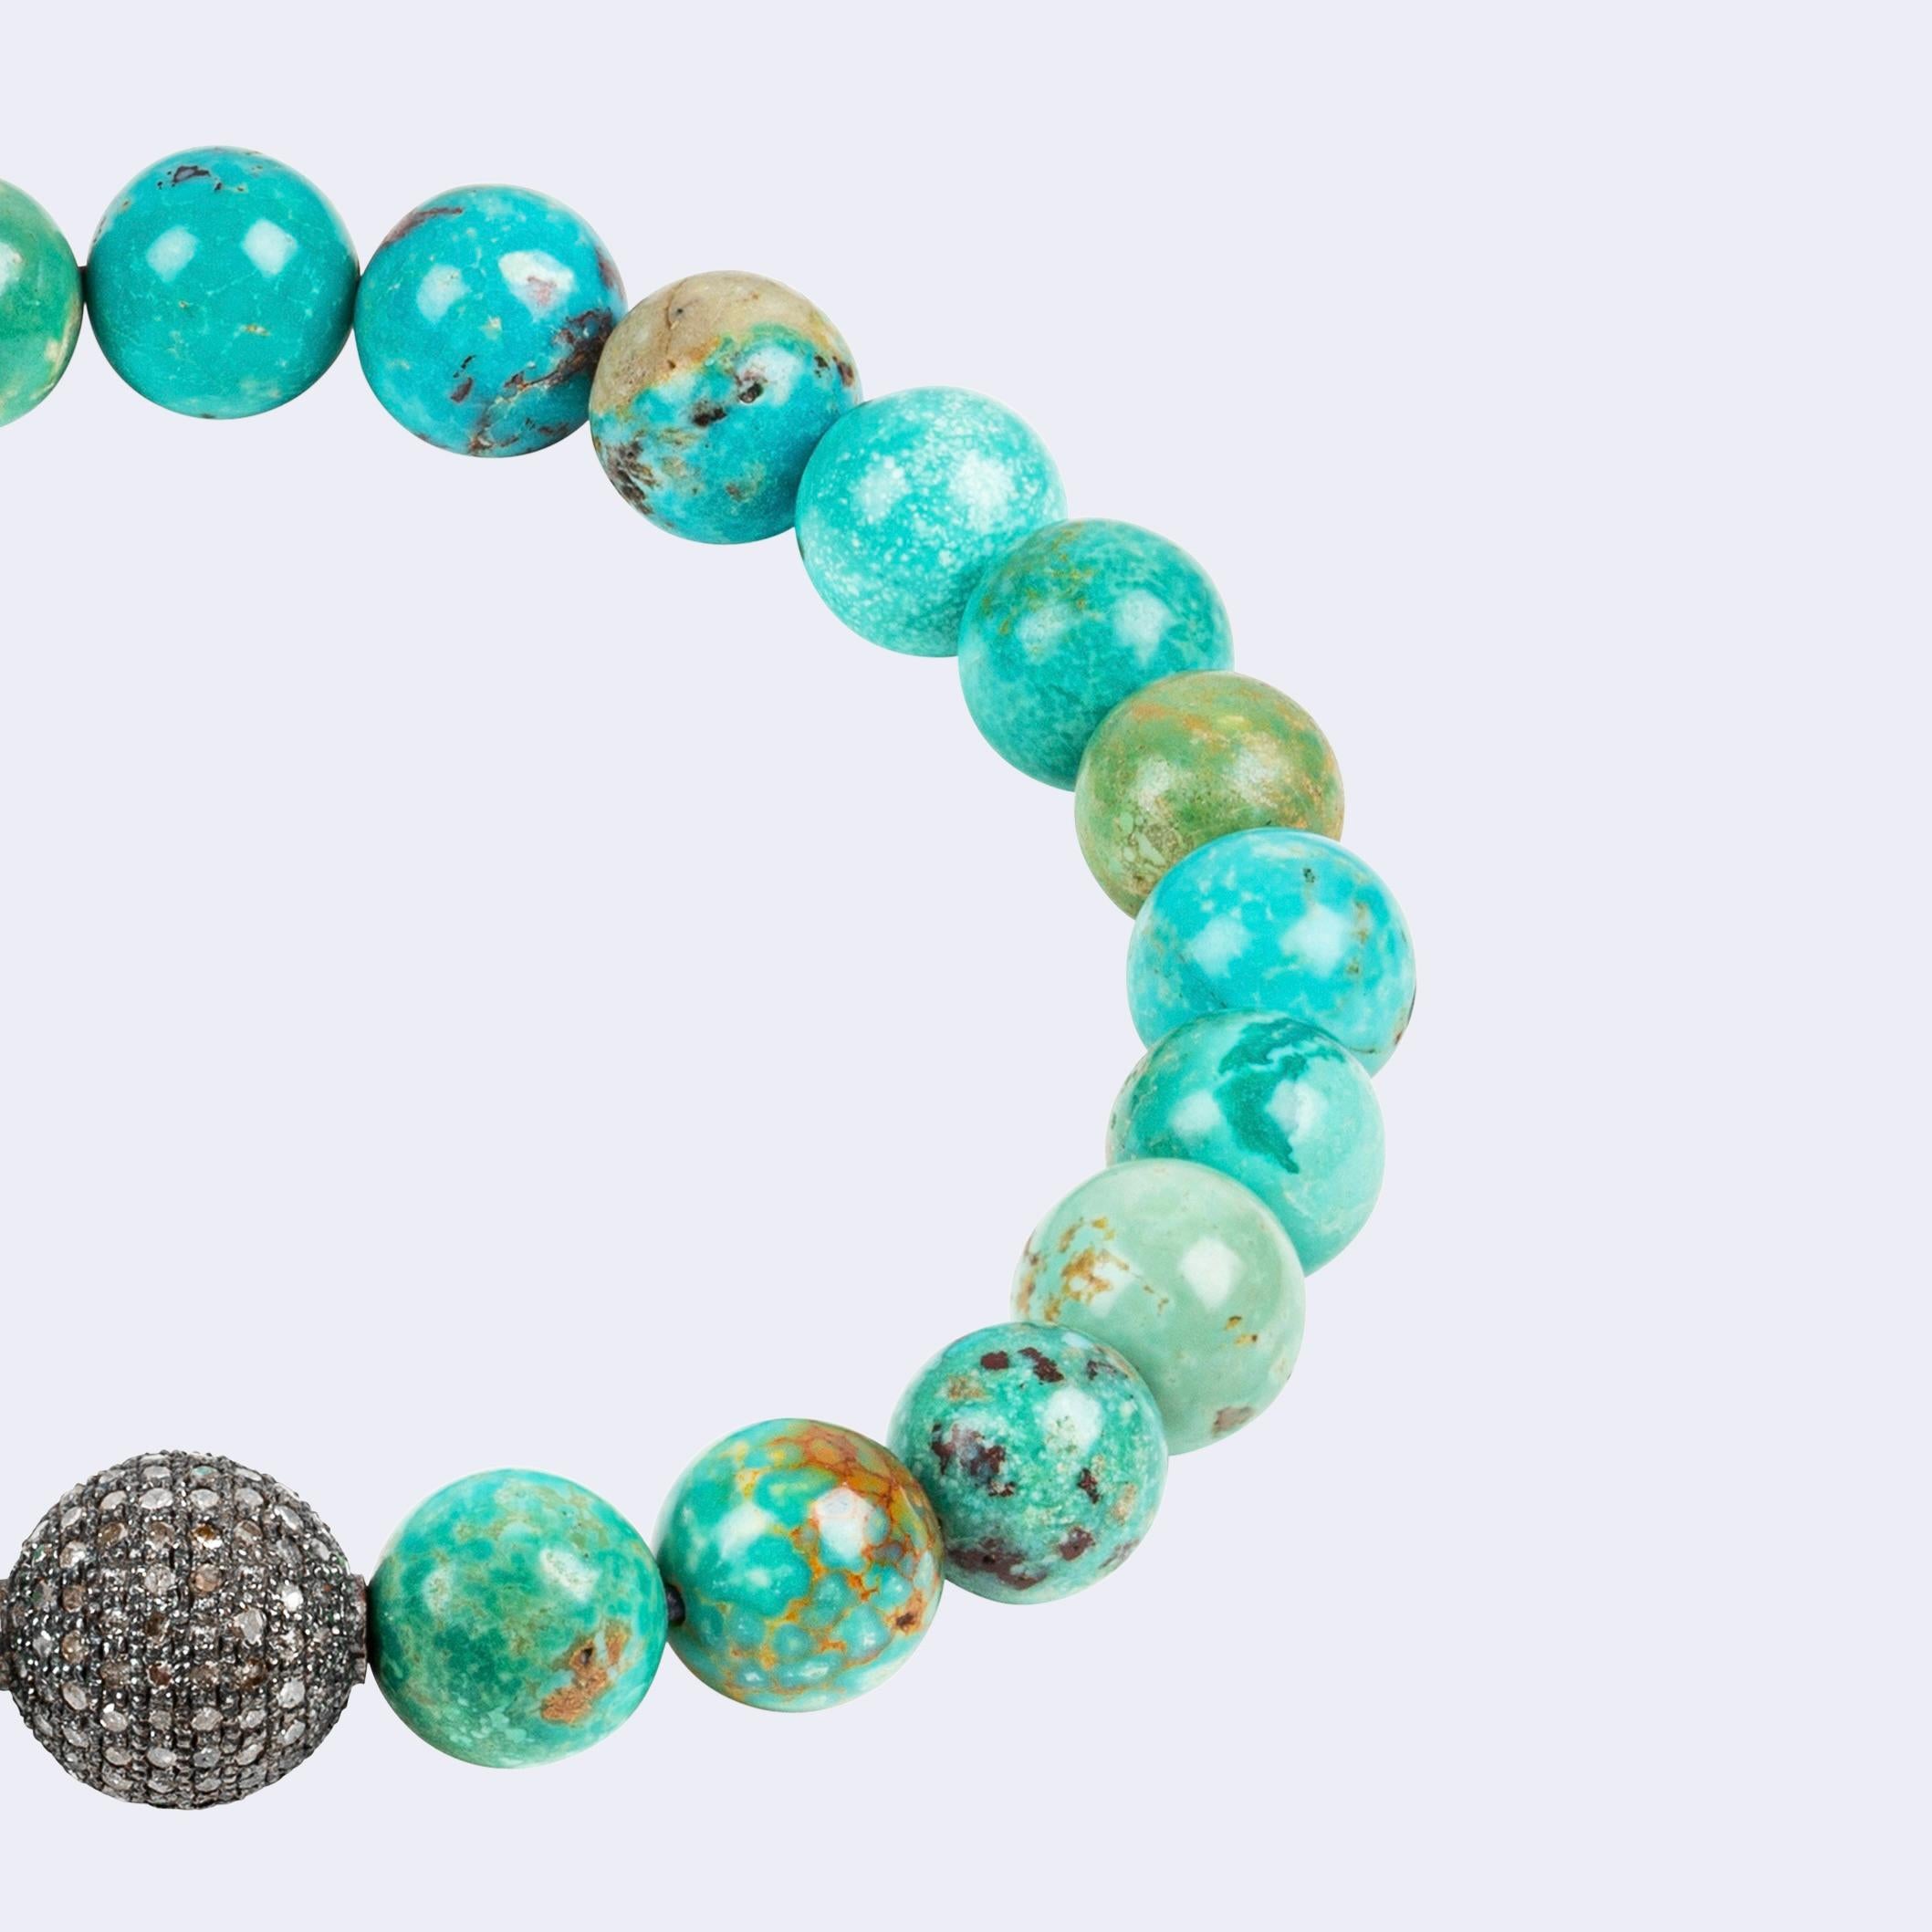 This bracelet is made of beautiful Arizona natural turquoise beads and a black rhodium plated sterling silver bead, encrusted with silver and brown pavé-set diamonds
Natural means the stones have their natural color and have not been heat treated to